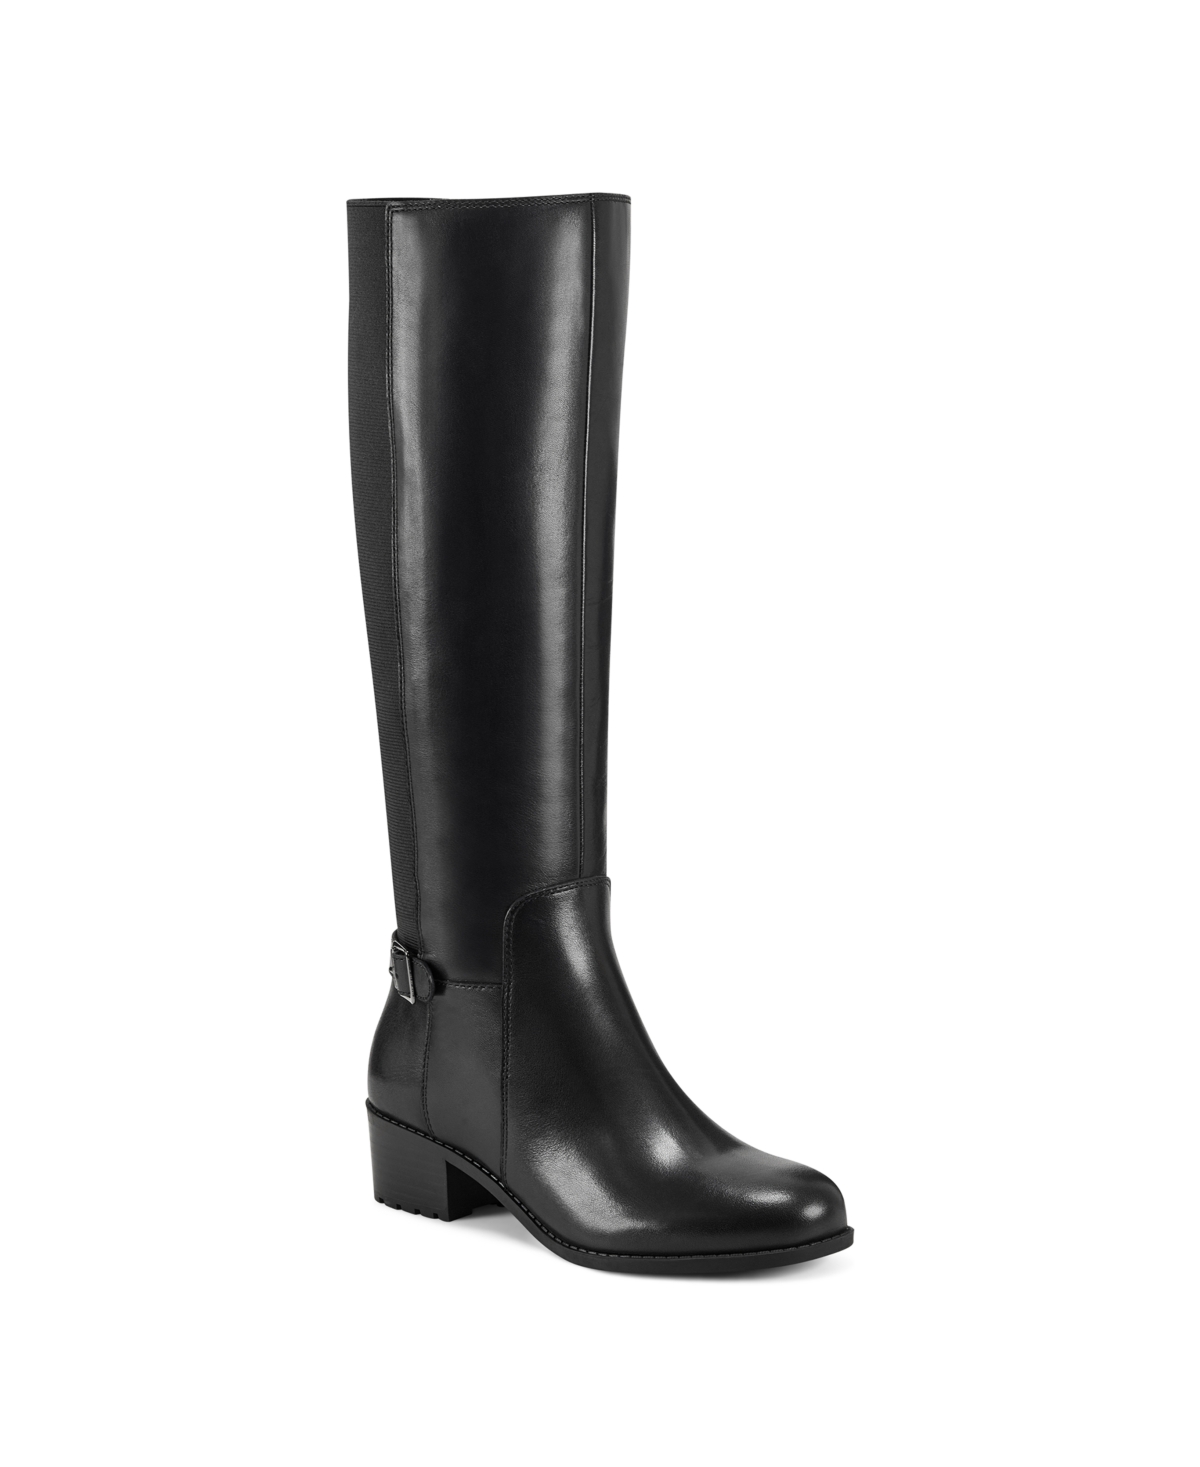 UPC 195608202243 product image for Easy Spirit Women's Chaza Tall Regular Calf Boots Women's Shoes | upcitemdb.com